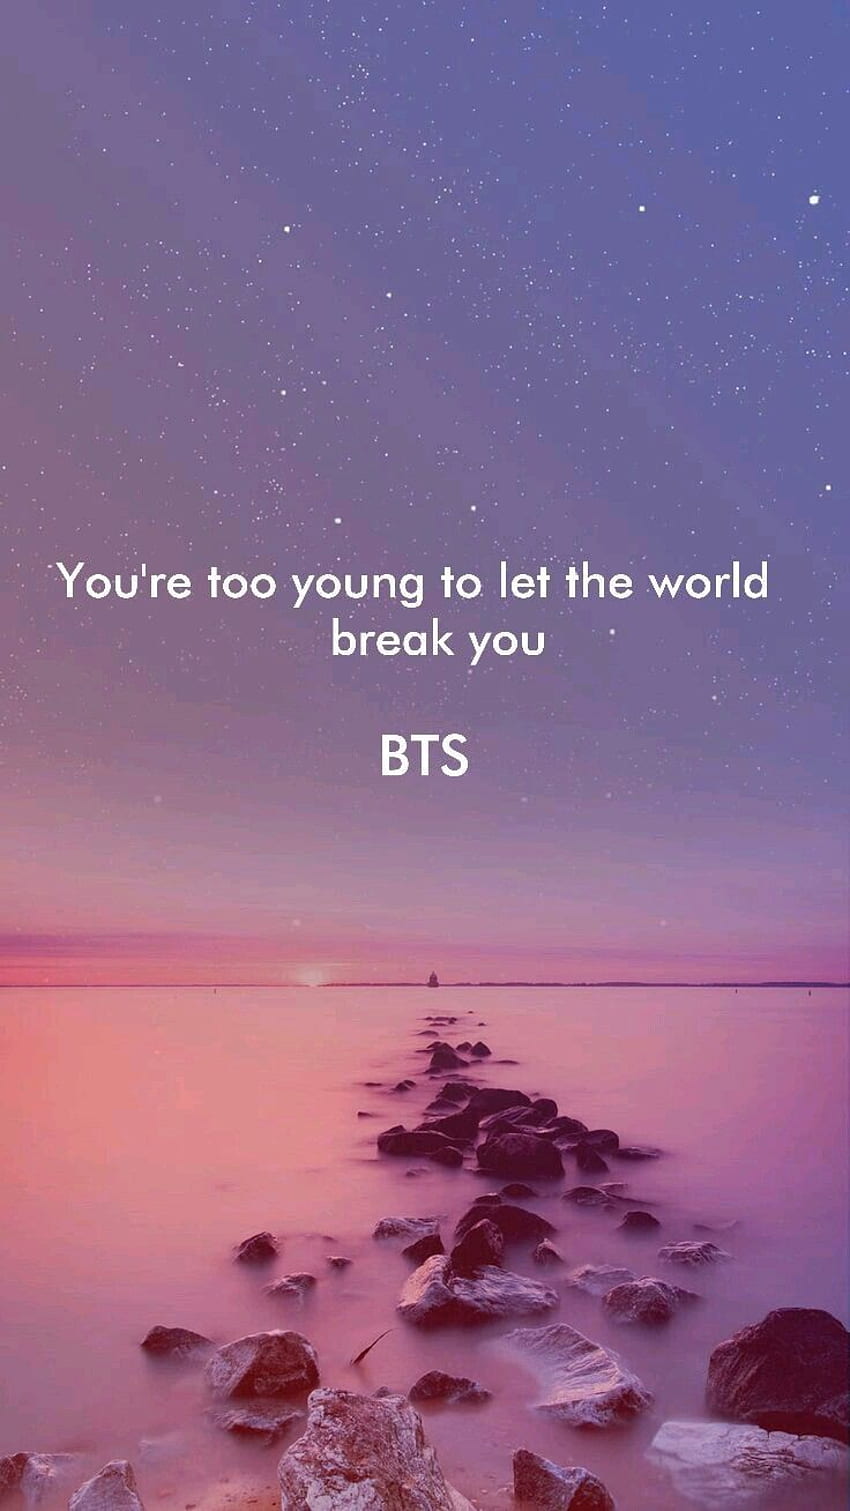 BTS QUOTES  wallpapers  twitter headers new  3rd Sheaf  Wattpad